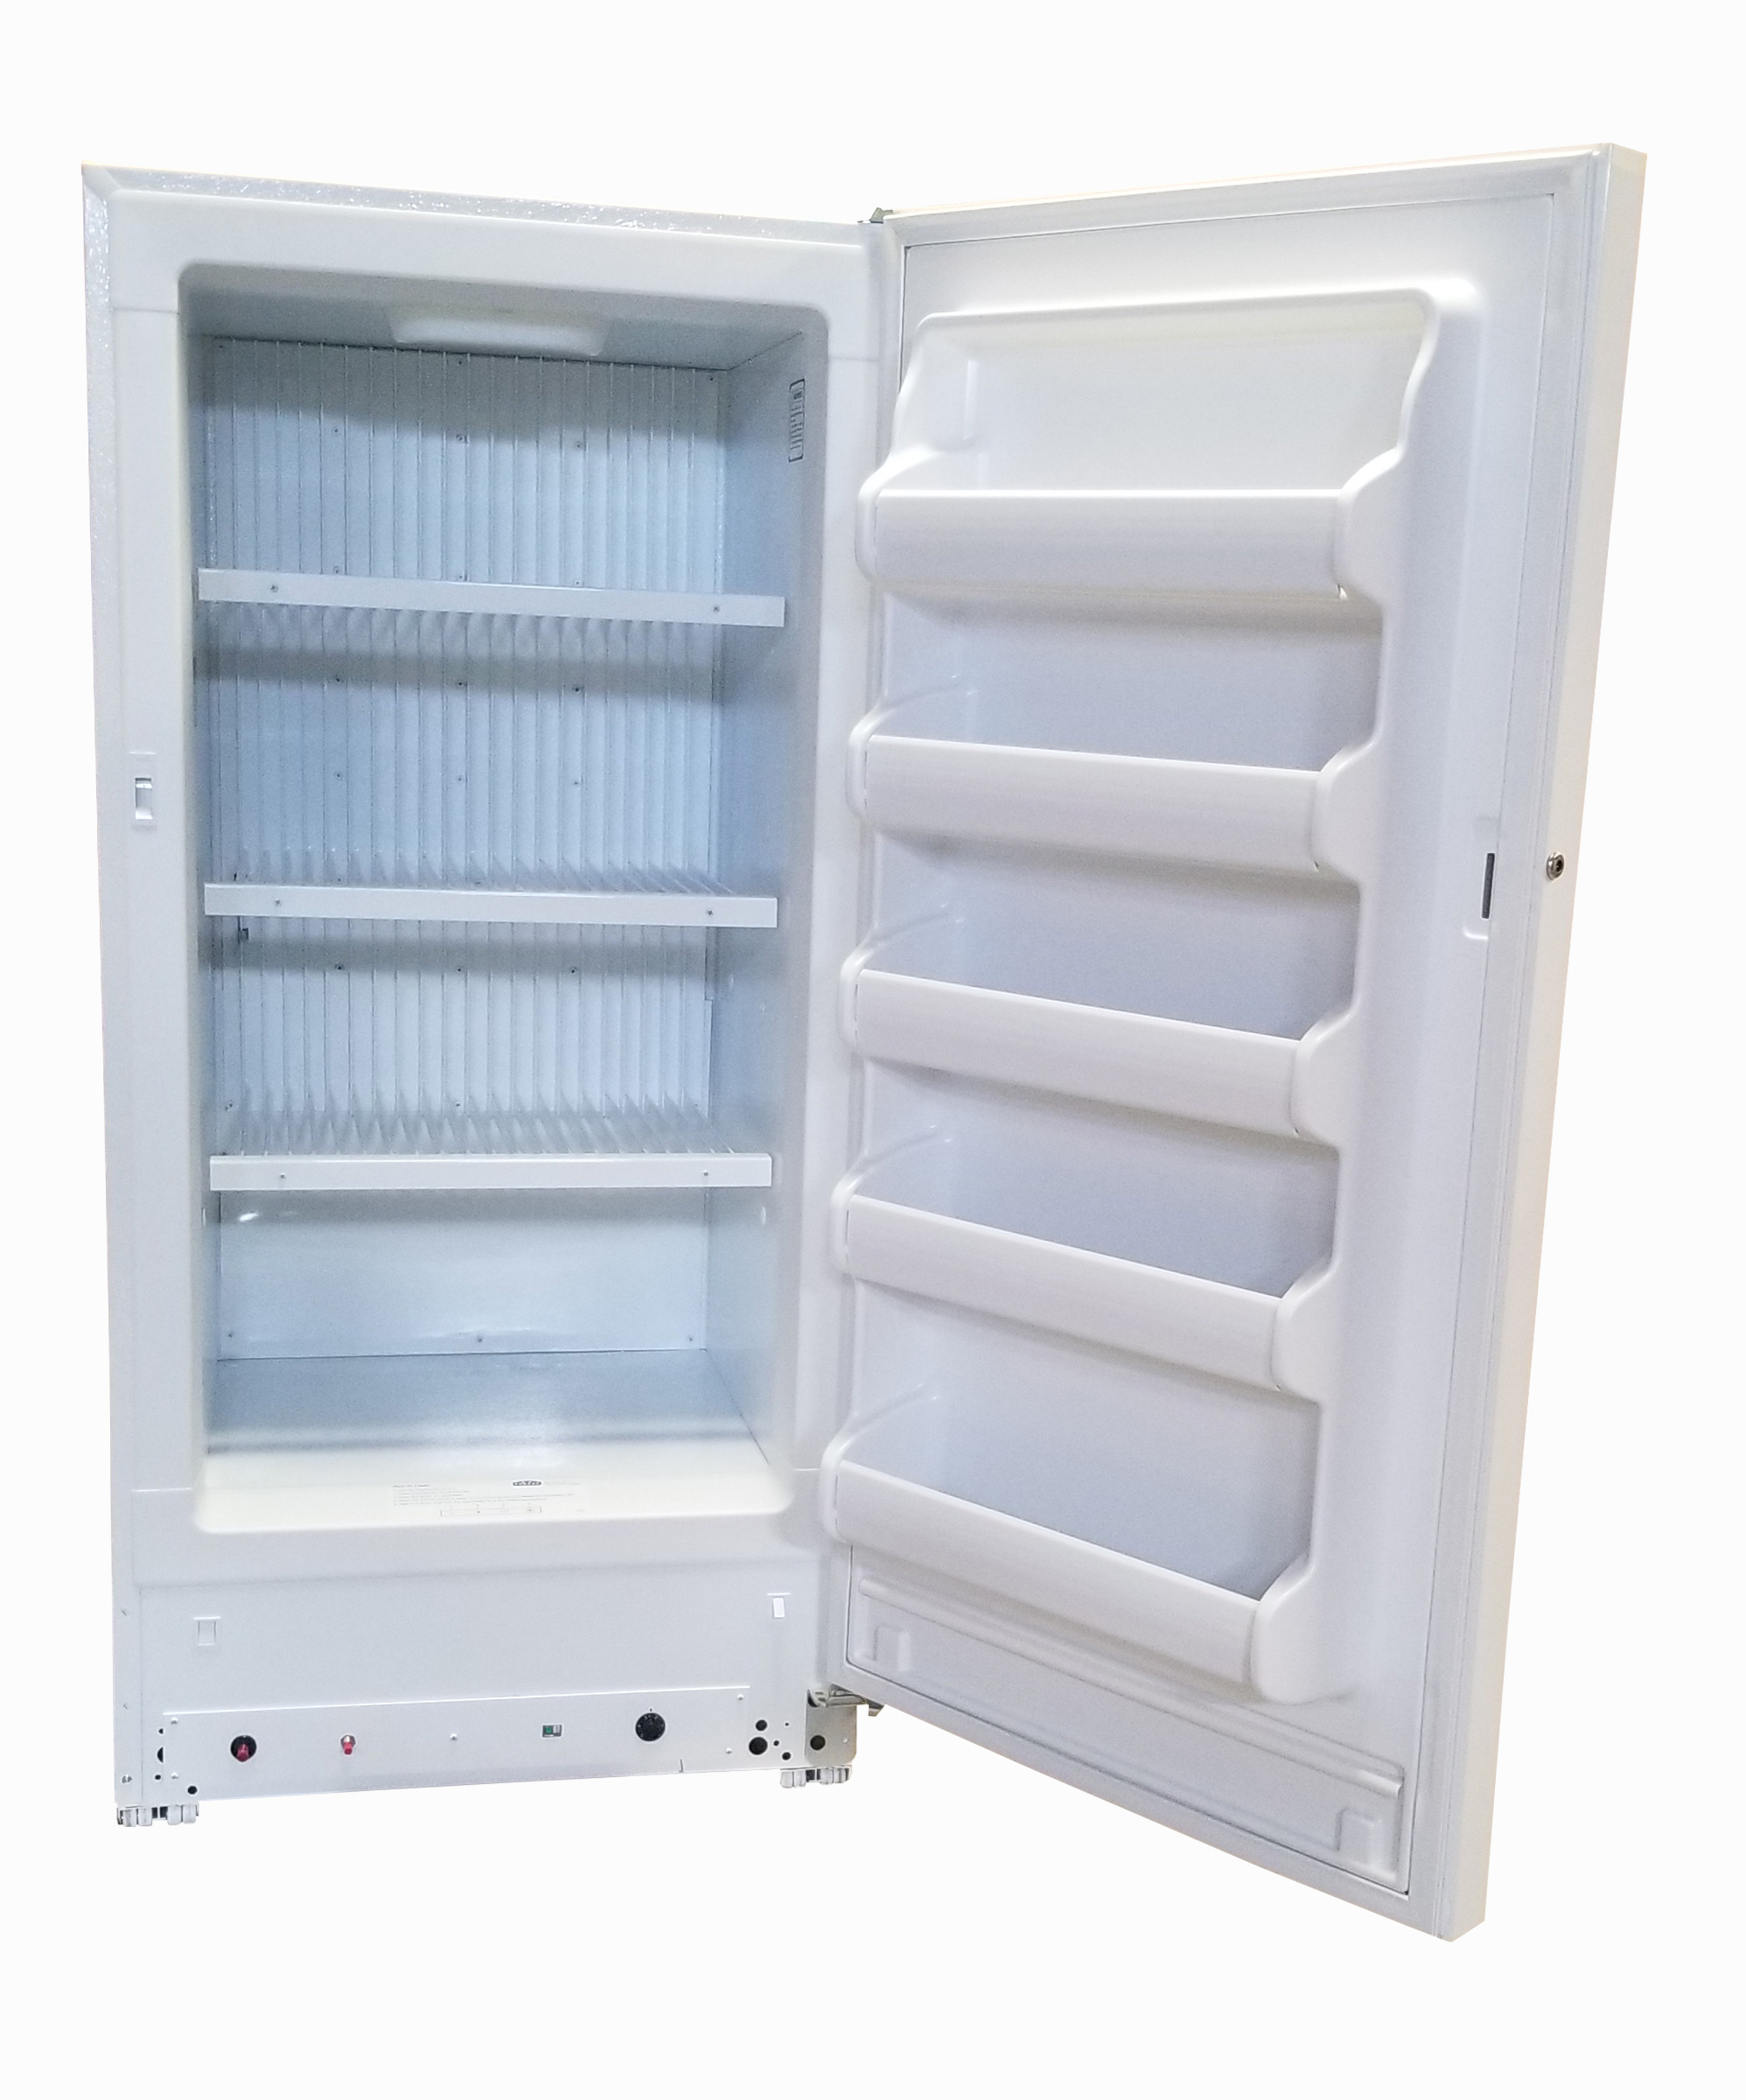 The interior space of the Blizzard 15 by EZ Freeze propane gas freezer